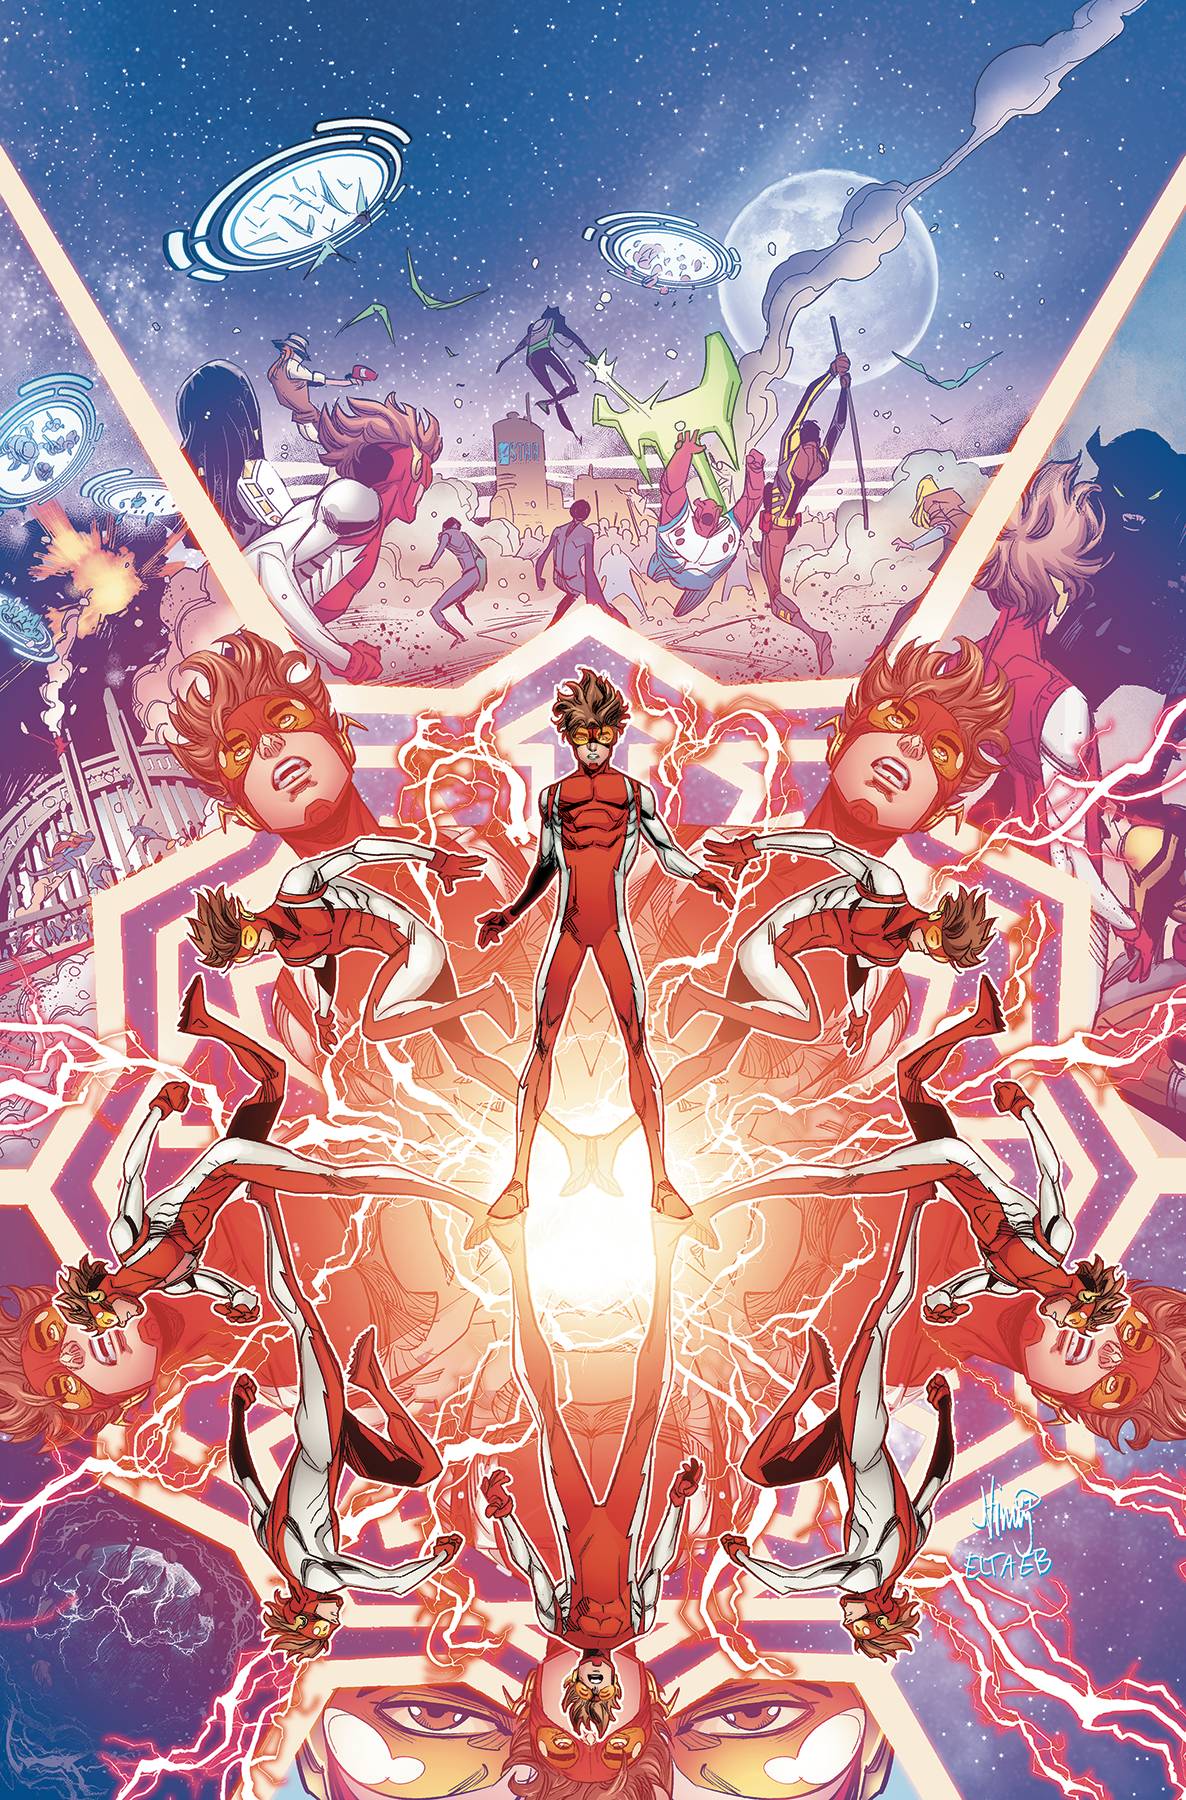 YOUNG JUSTICE #16